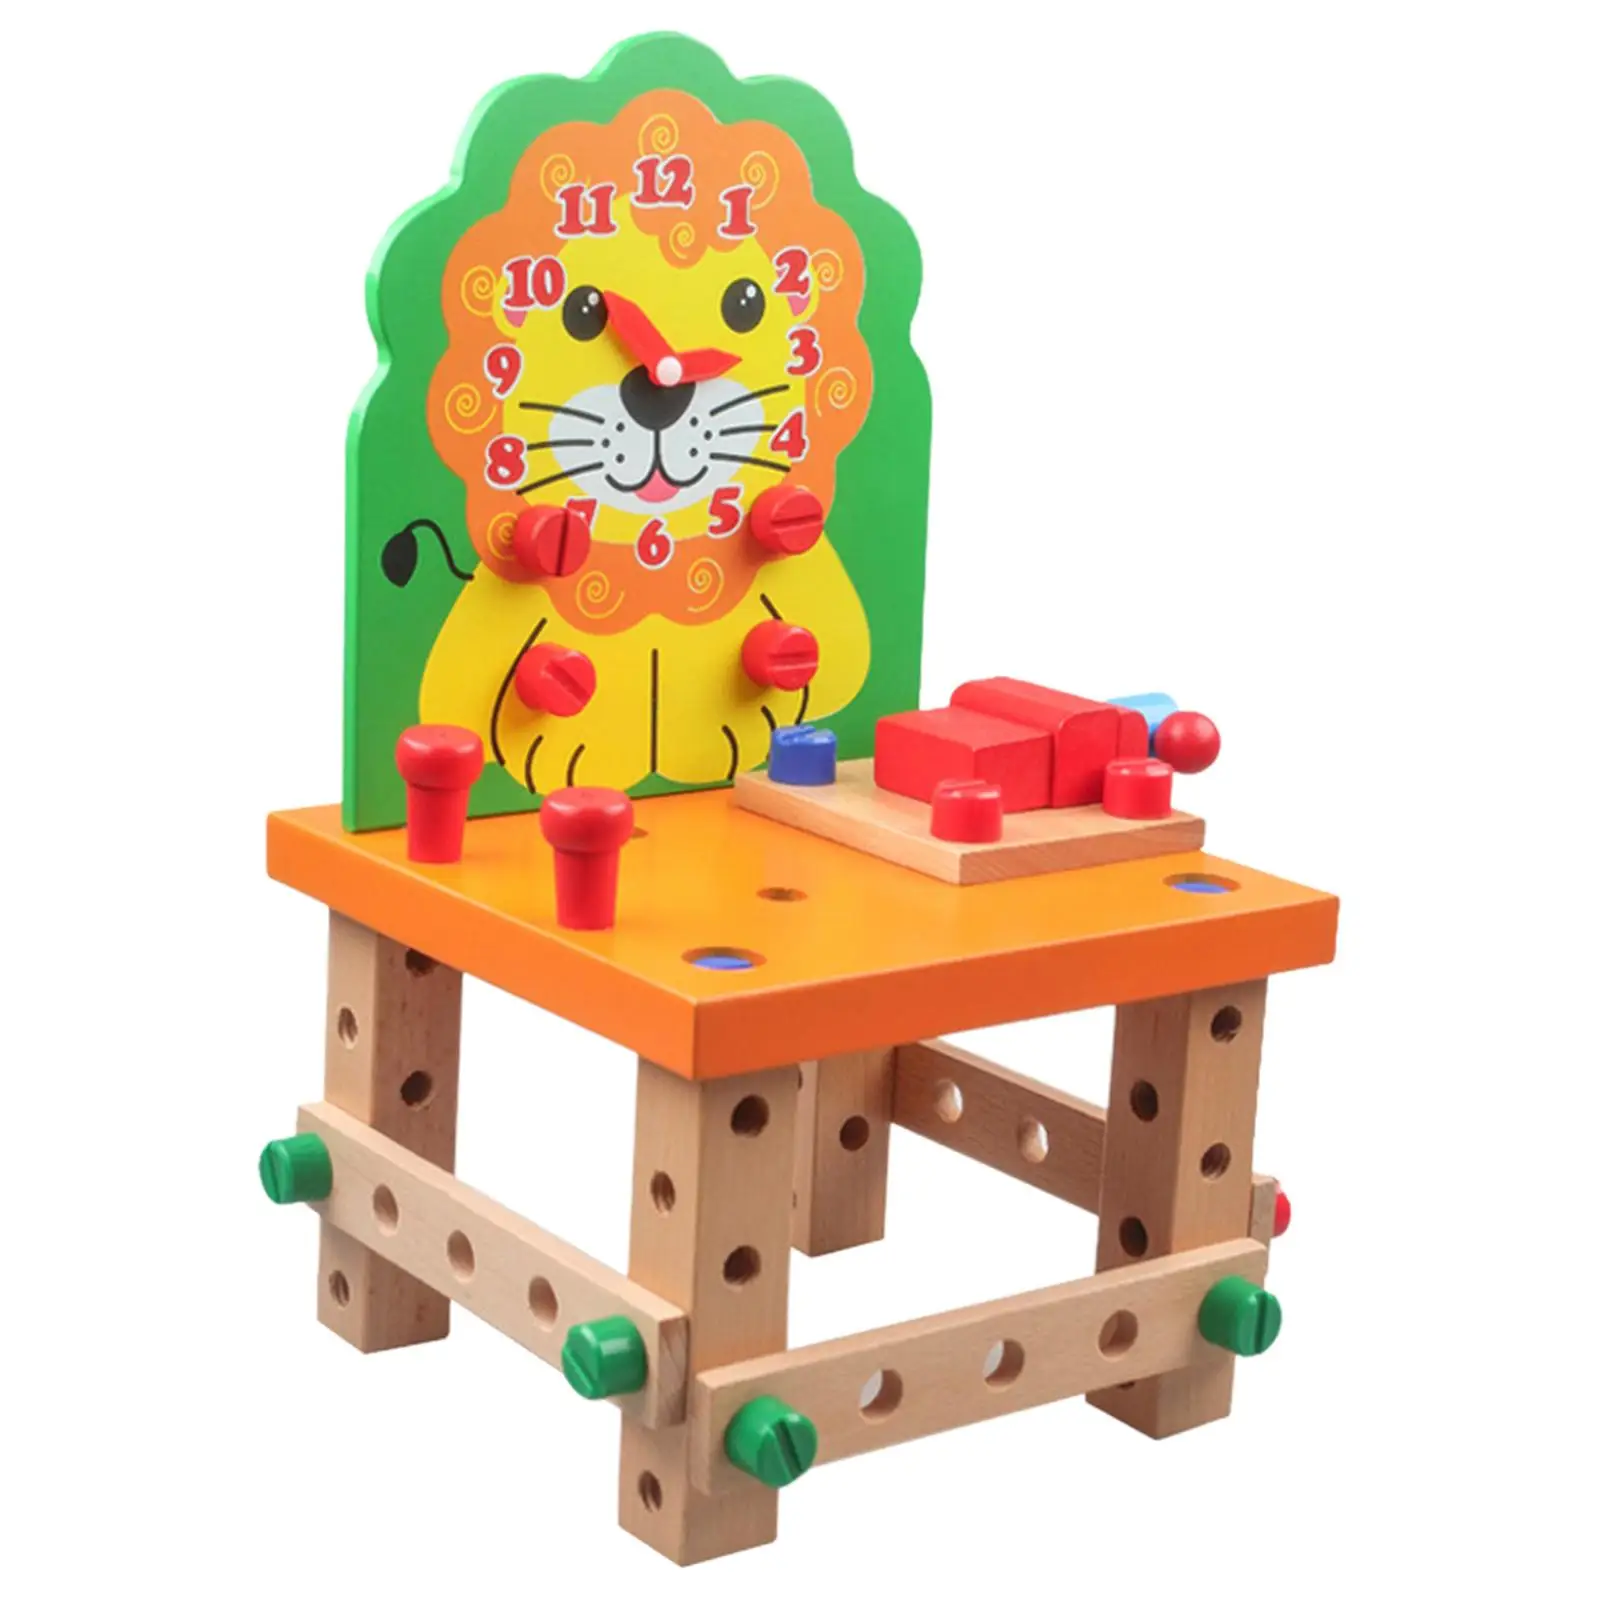 Wooden Assembling Chair Nuts and Bolts Toy Montessori Toys for Girls Boys